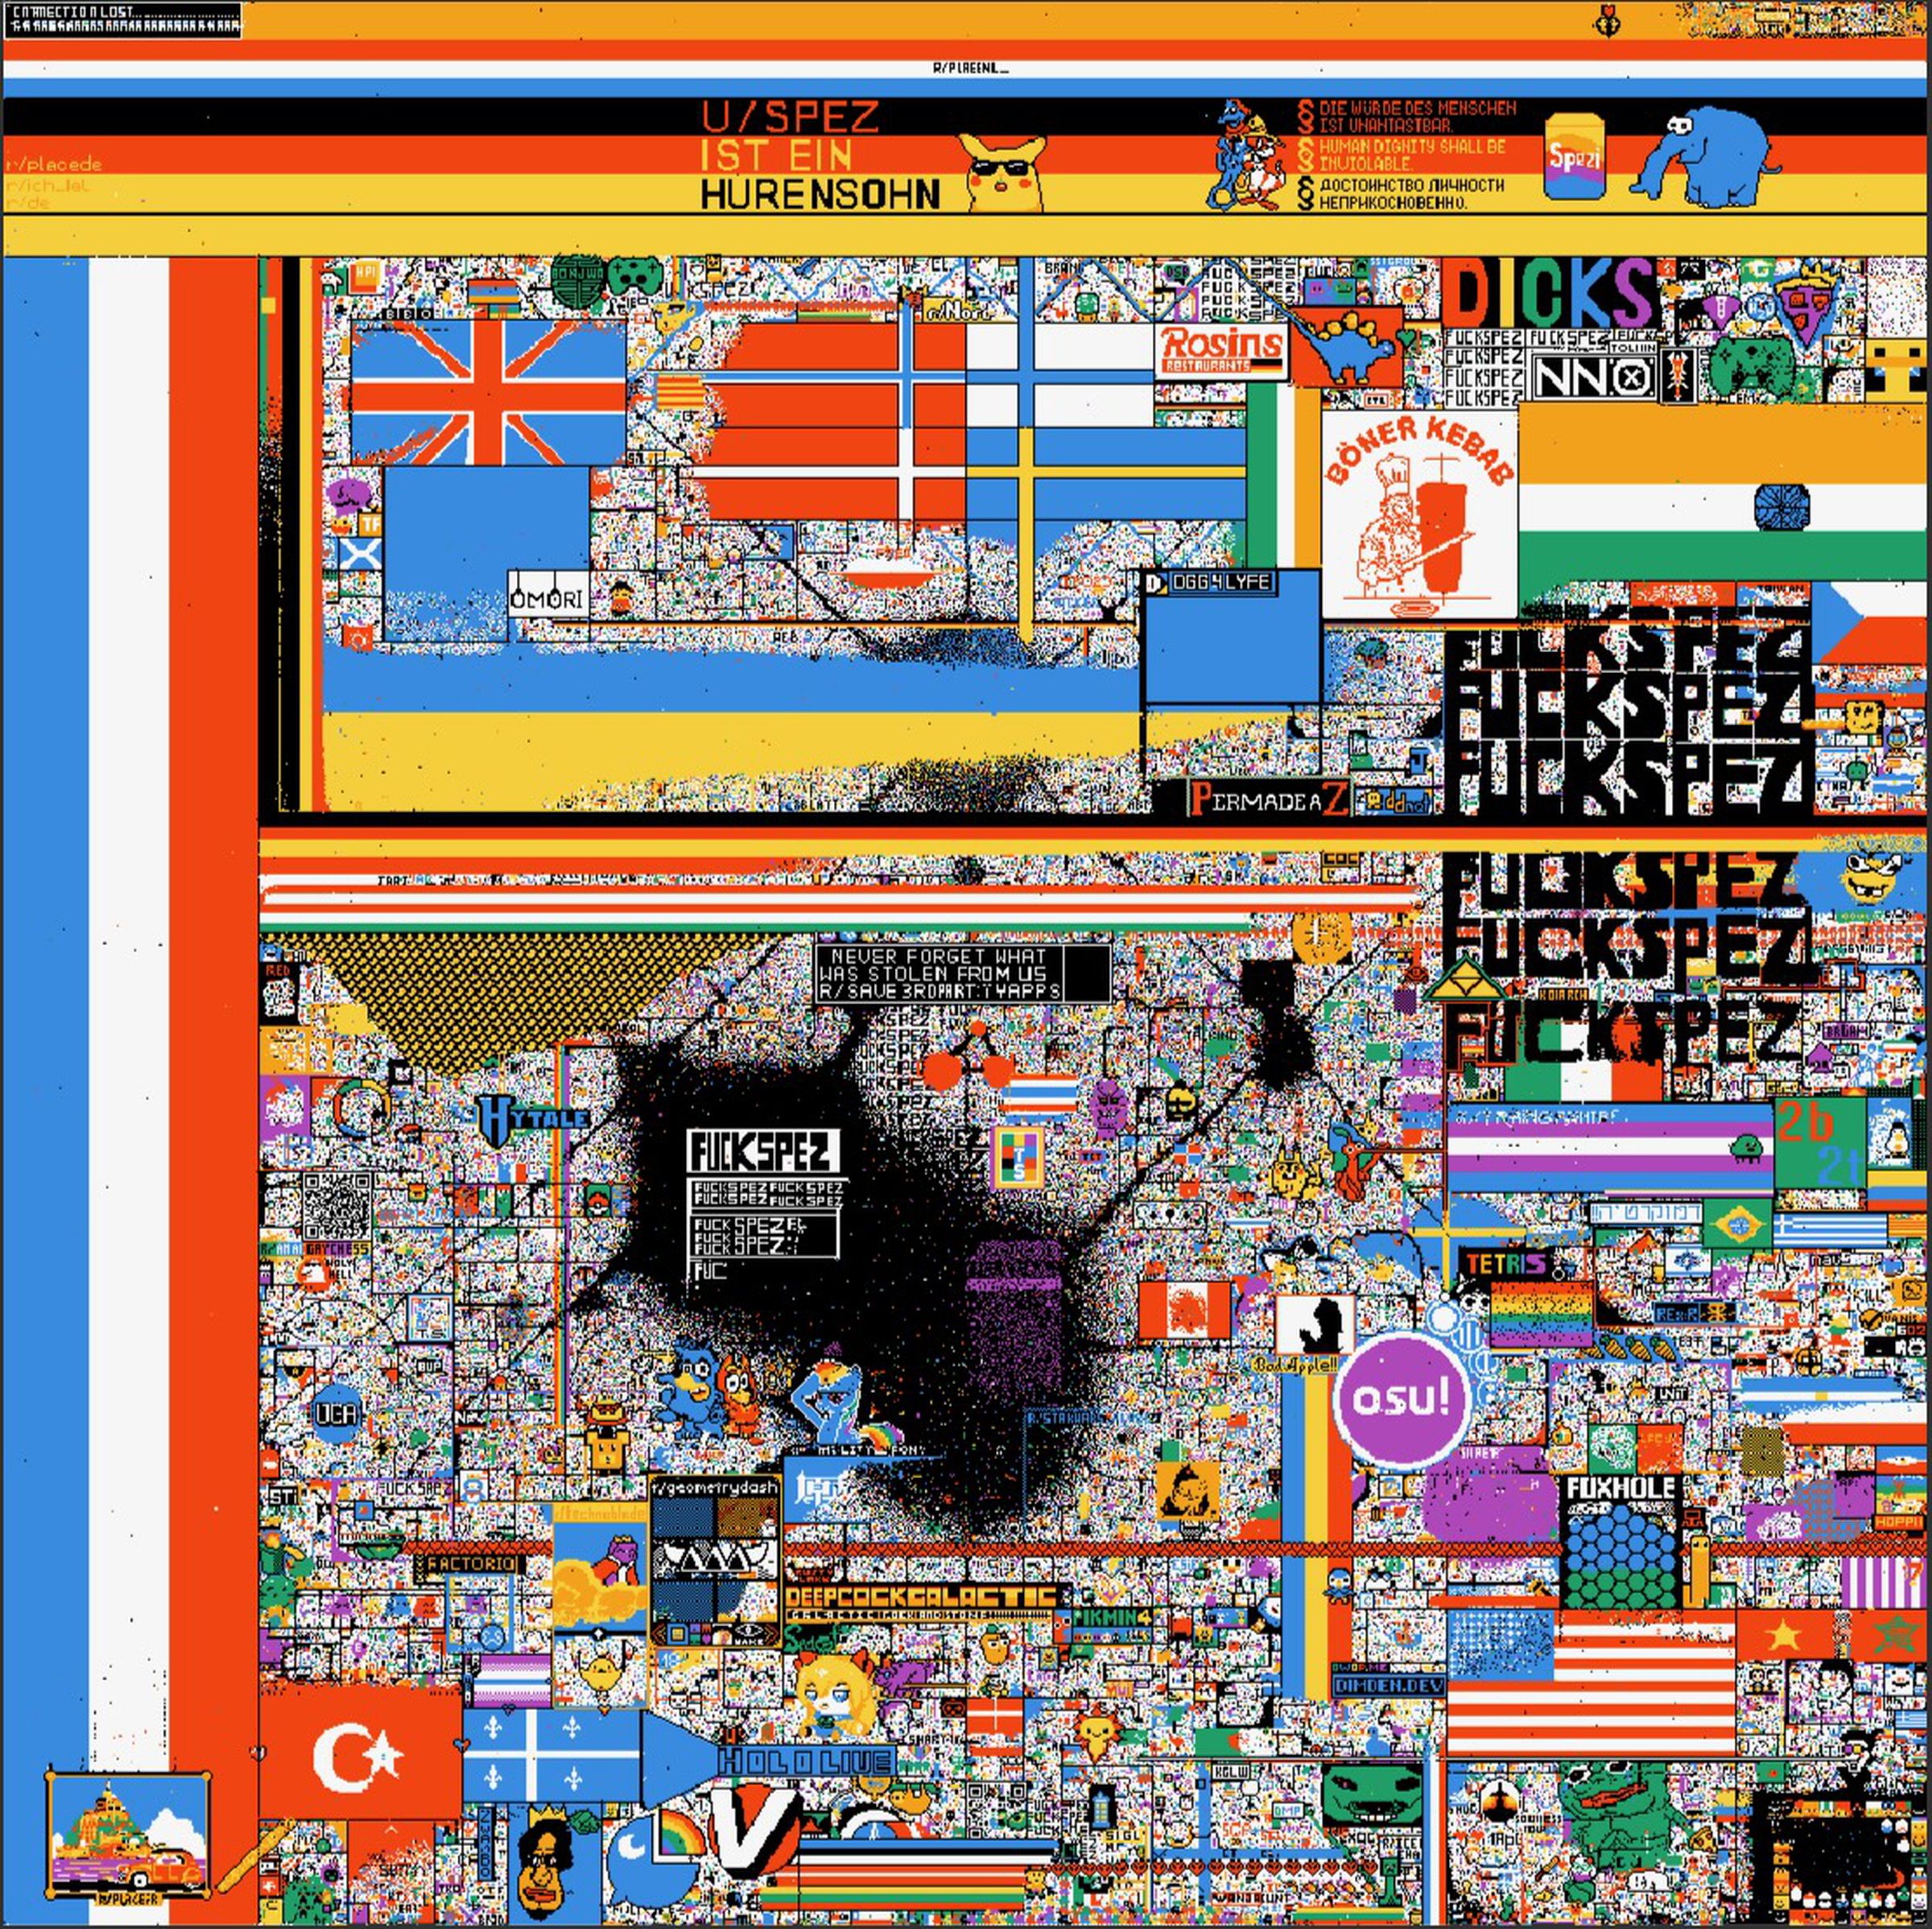 An image of the r/Place canvas.